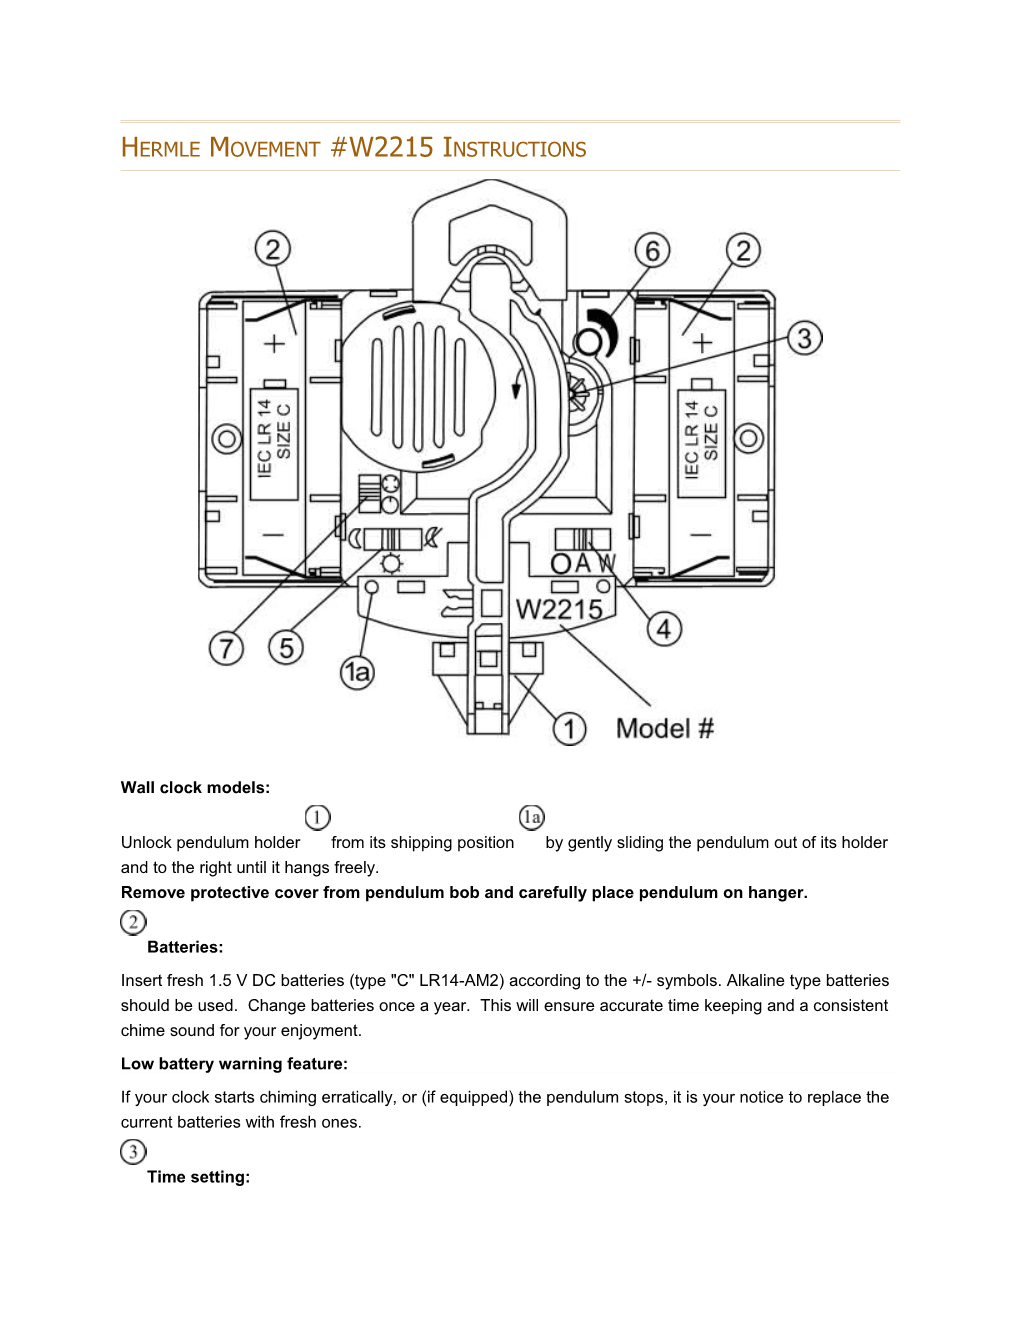 Hermle Movement #W2215 Instructions